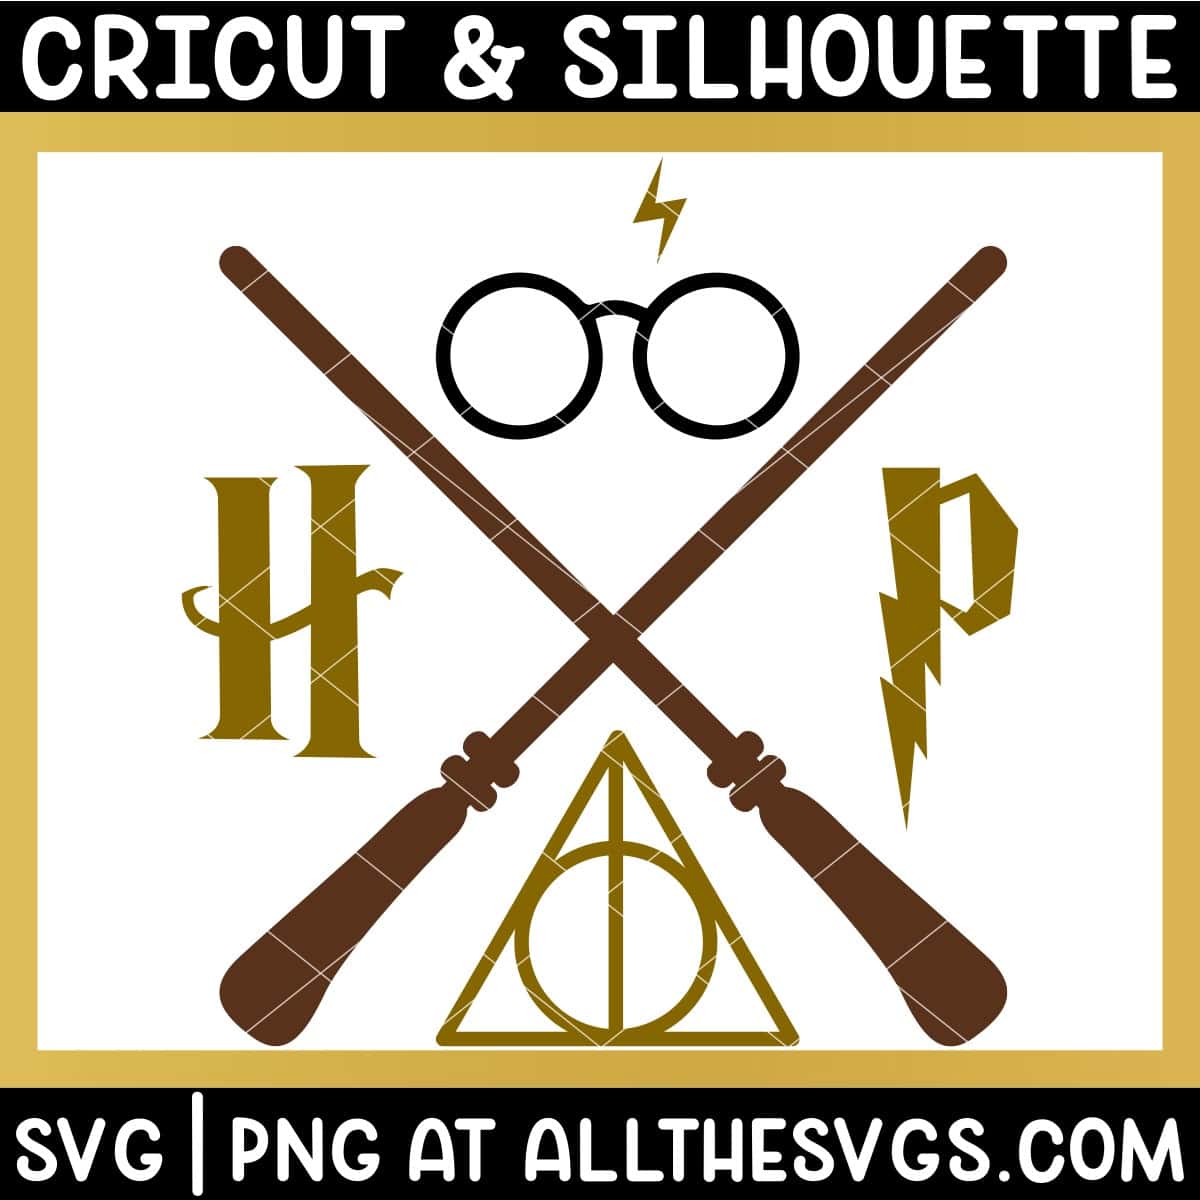 free harry potter svg png with wand cross, lightning bolt, glasses, deathly hallows, hp initials.